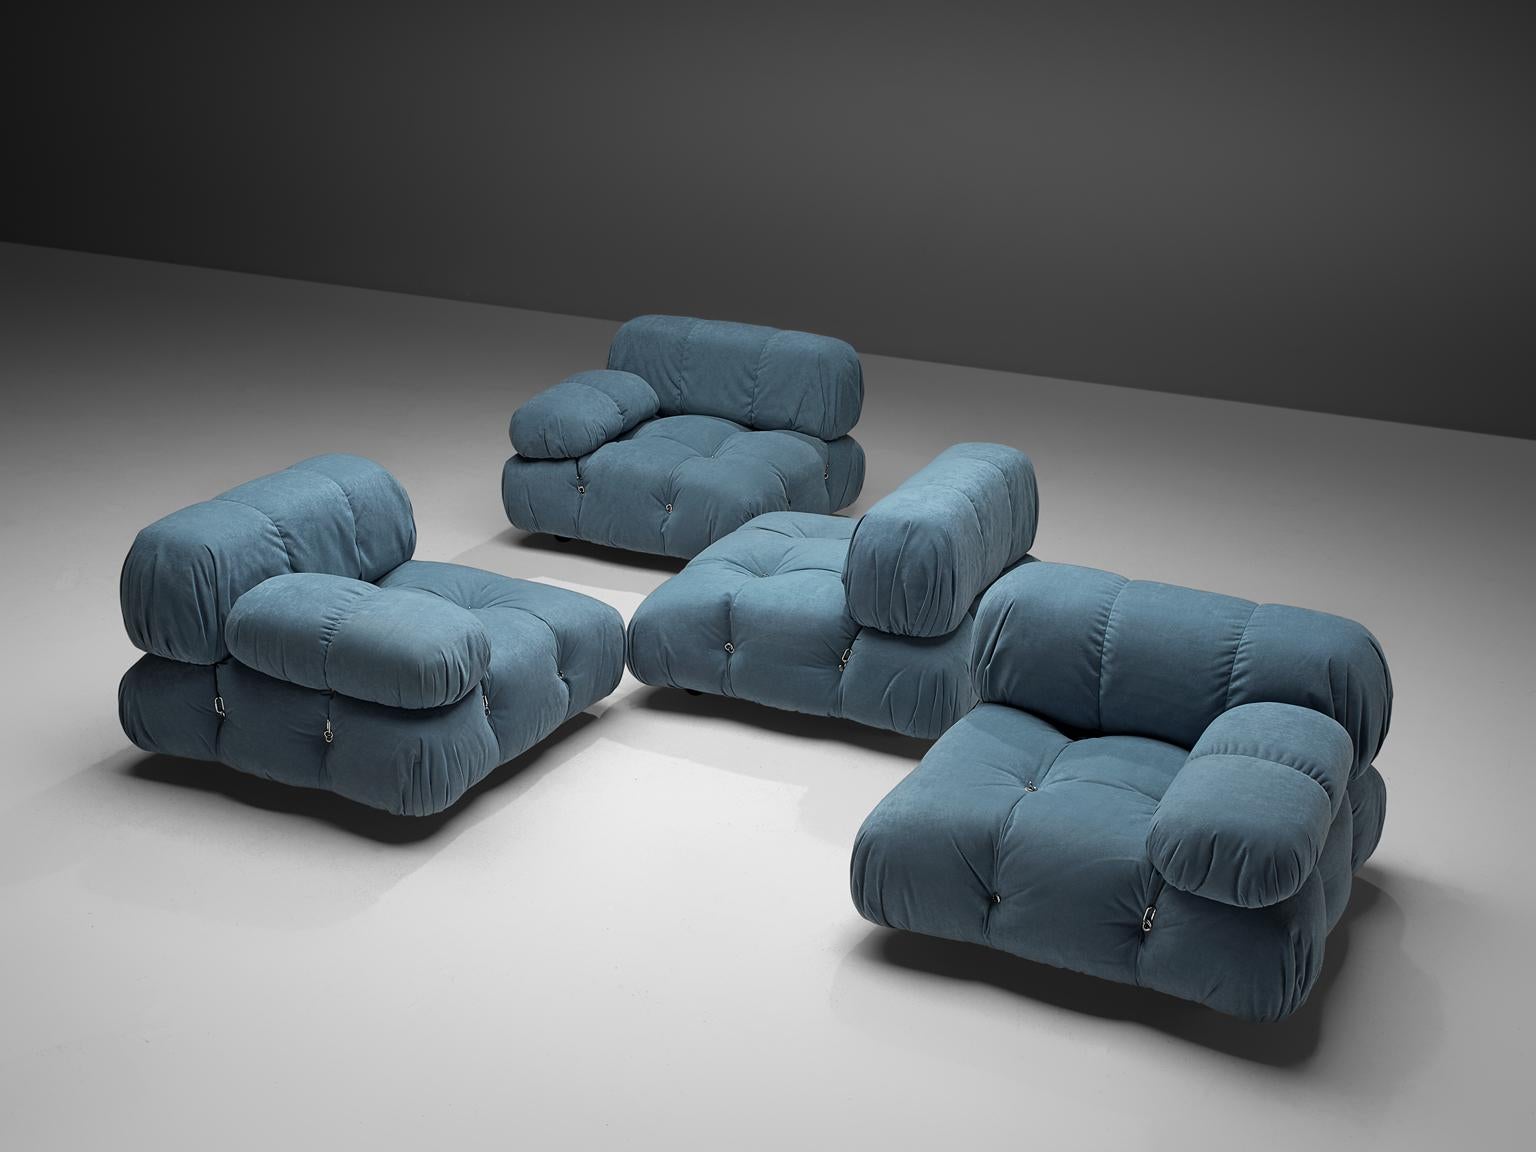 Mario Bellini, modular 'Cameleonda' sofa in in light blue velvet, Italy 1972.

The sectional elements of this sofa can be used freely and apart from one another. The upholstery on this piece features an blue original velvet. The backs are provided